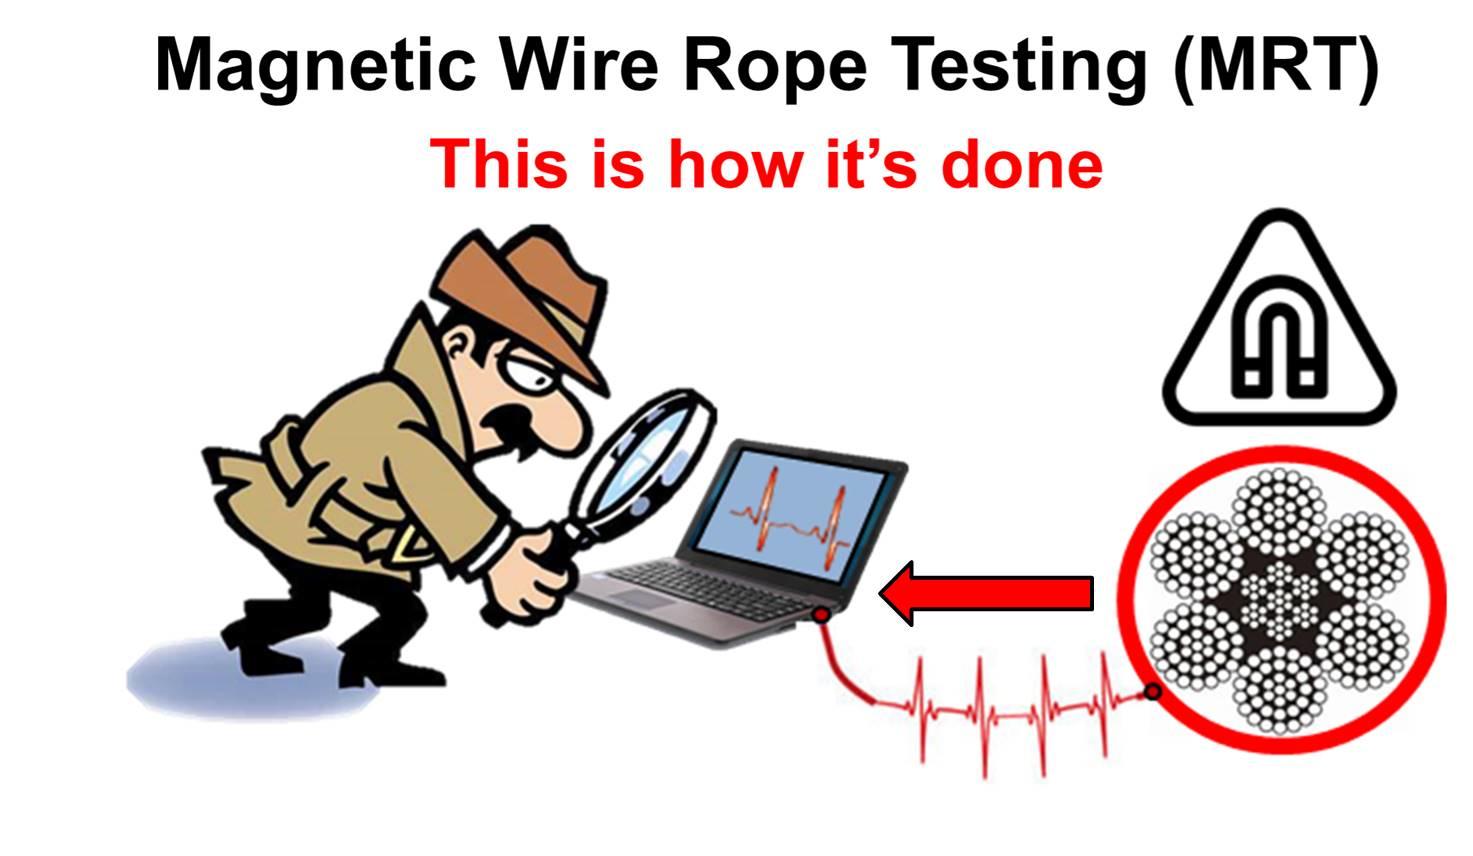 MAGNETIC WIRE ROPE TESTING (MRT): This is how it's done! NDT